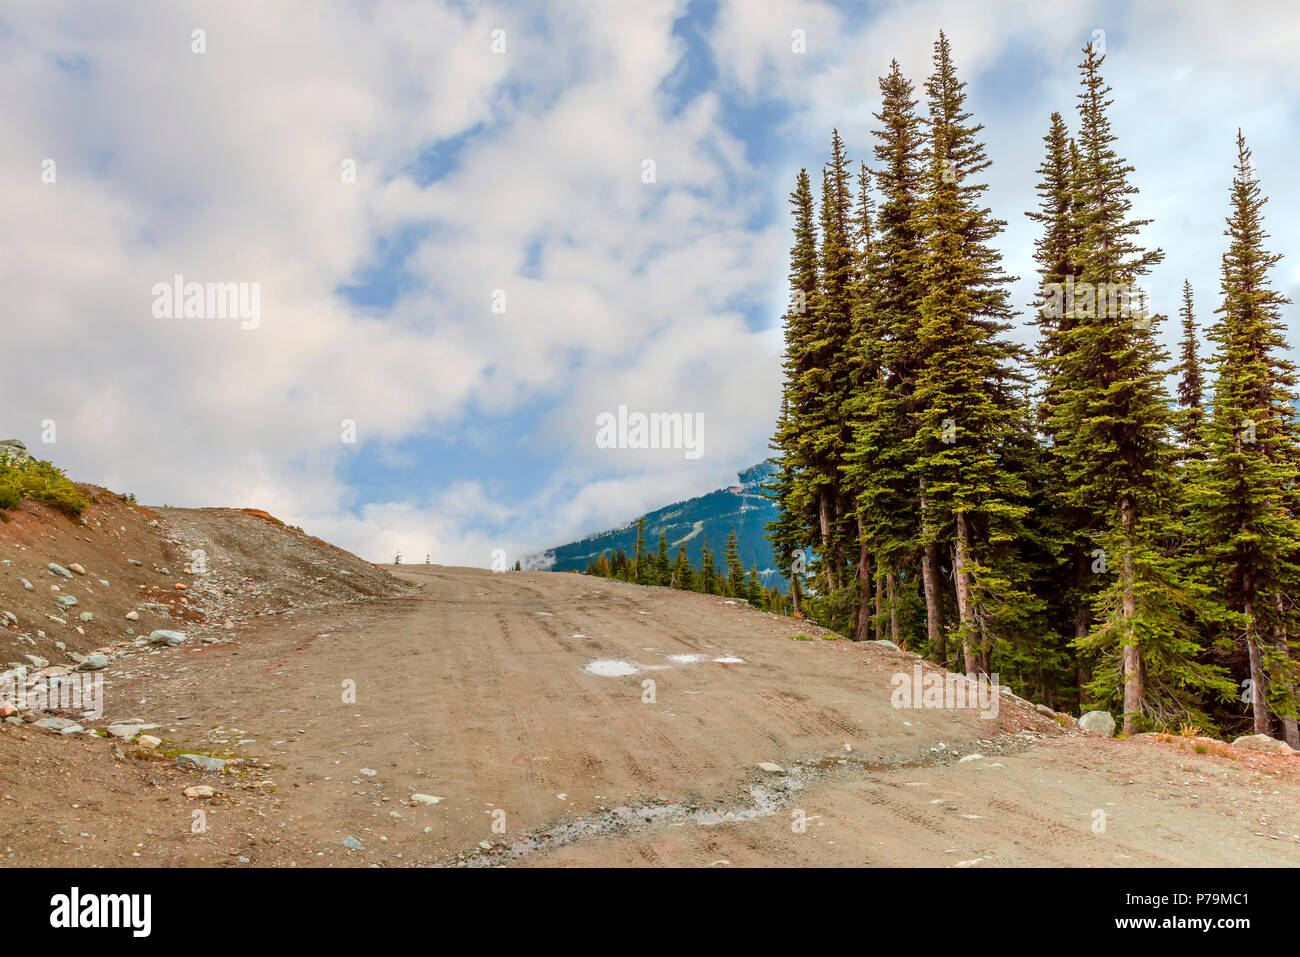 A dirt road in the rocky mountains among green firs and snowdrifts on a summer day with blue sky and white clouds Stock Photo